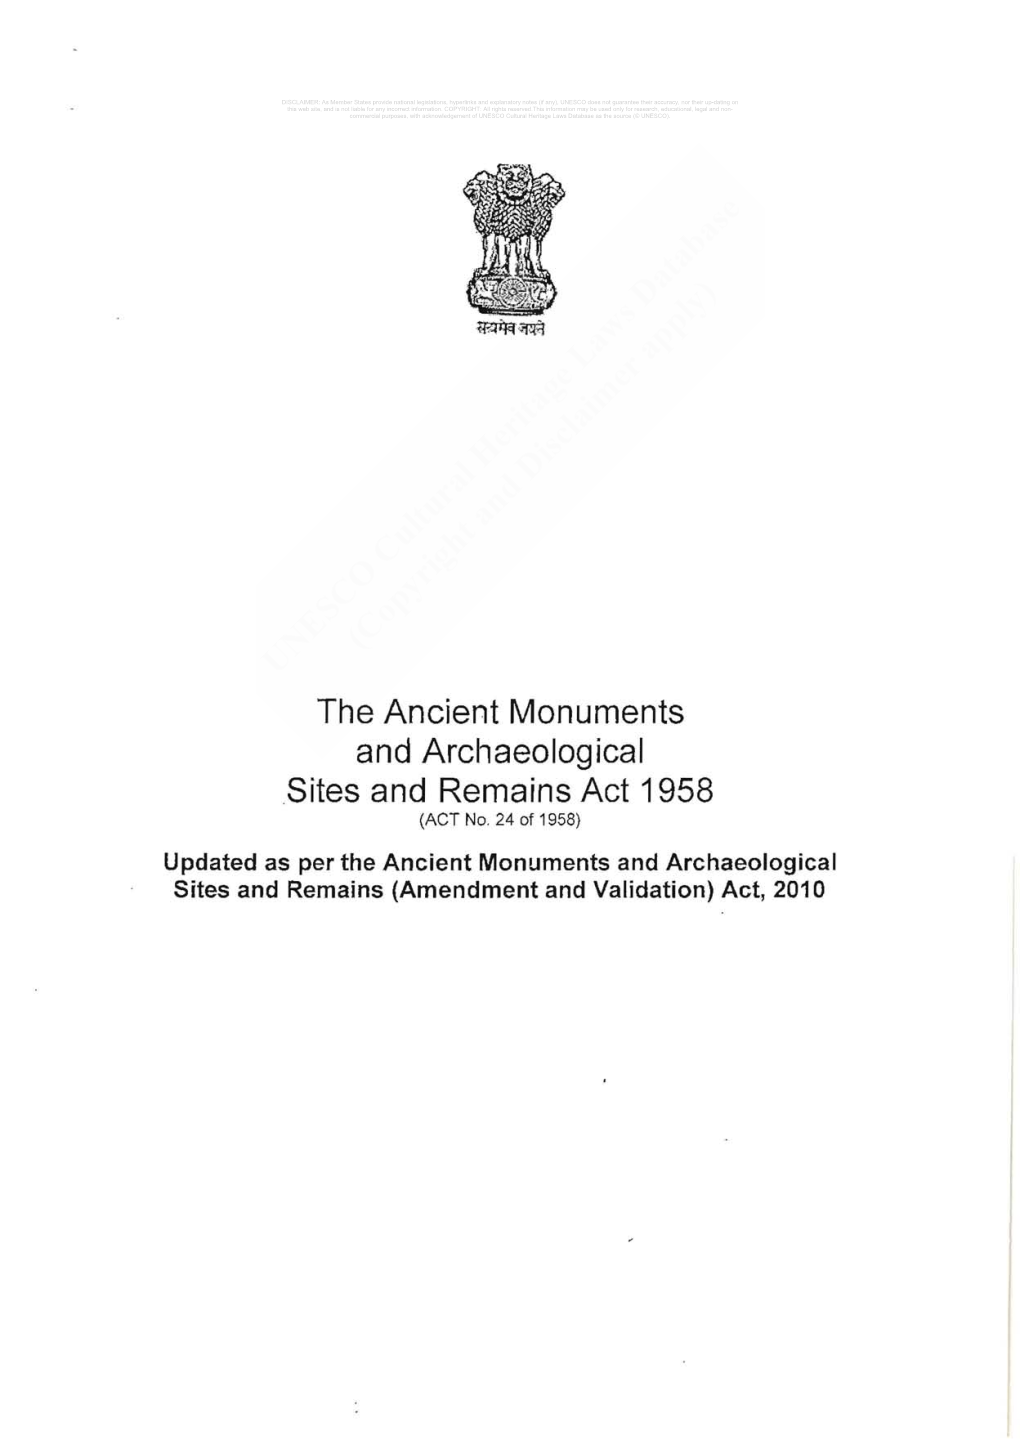 The Ancient Monuments and Archaeological .Sites and Remains Act 1958 (ACT No